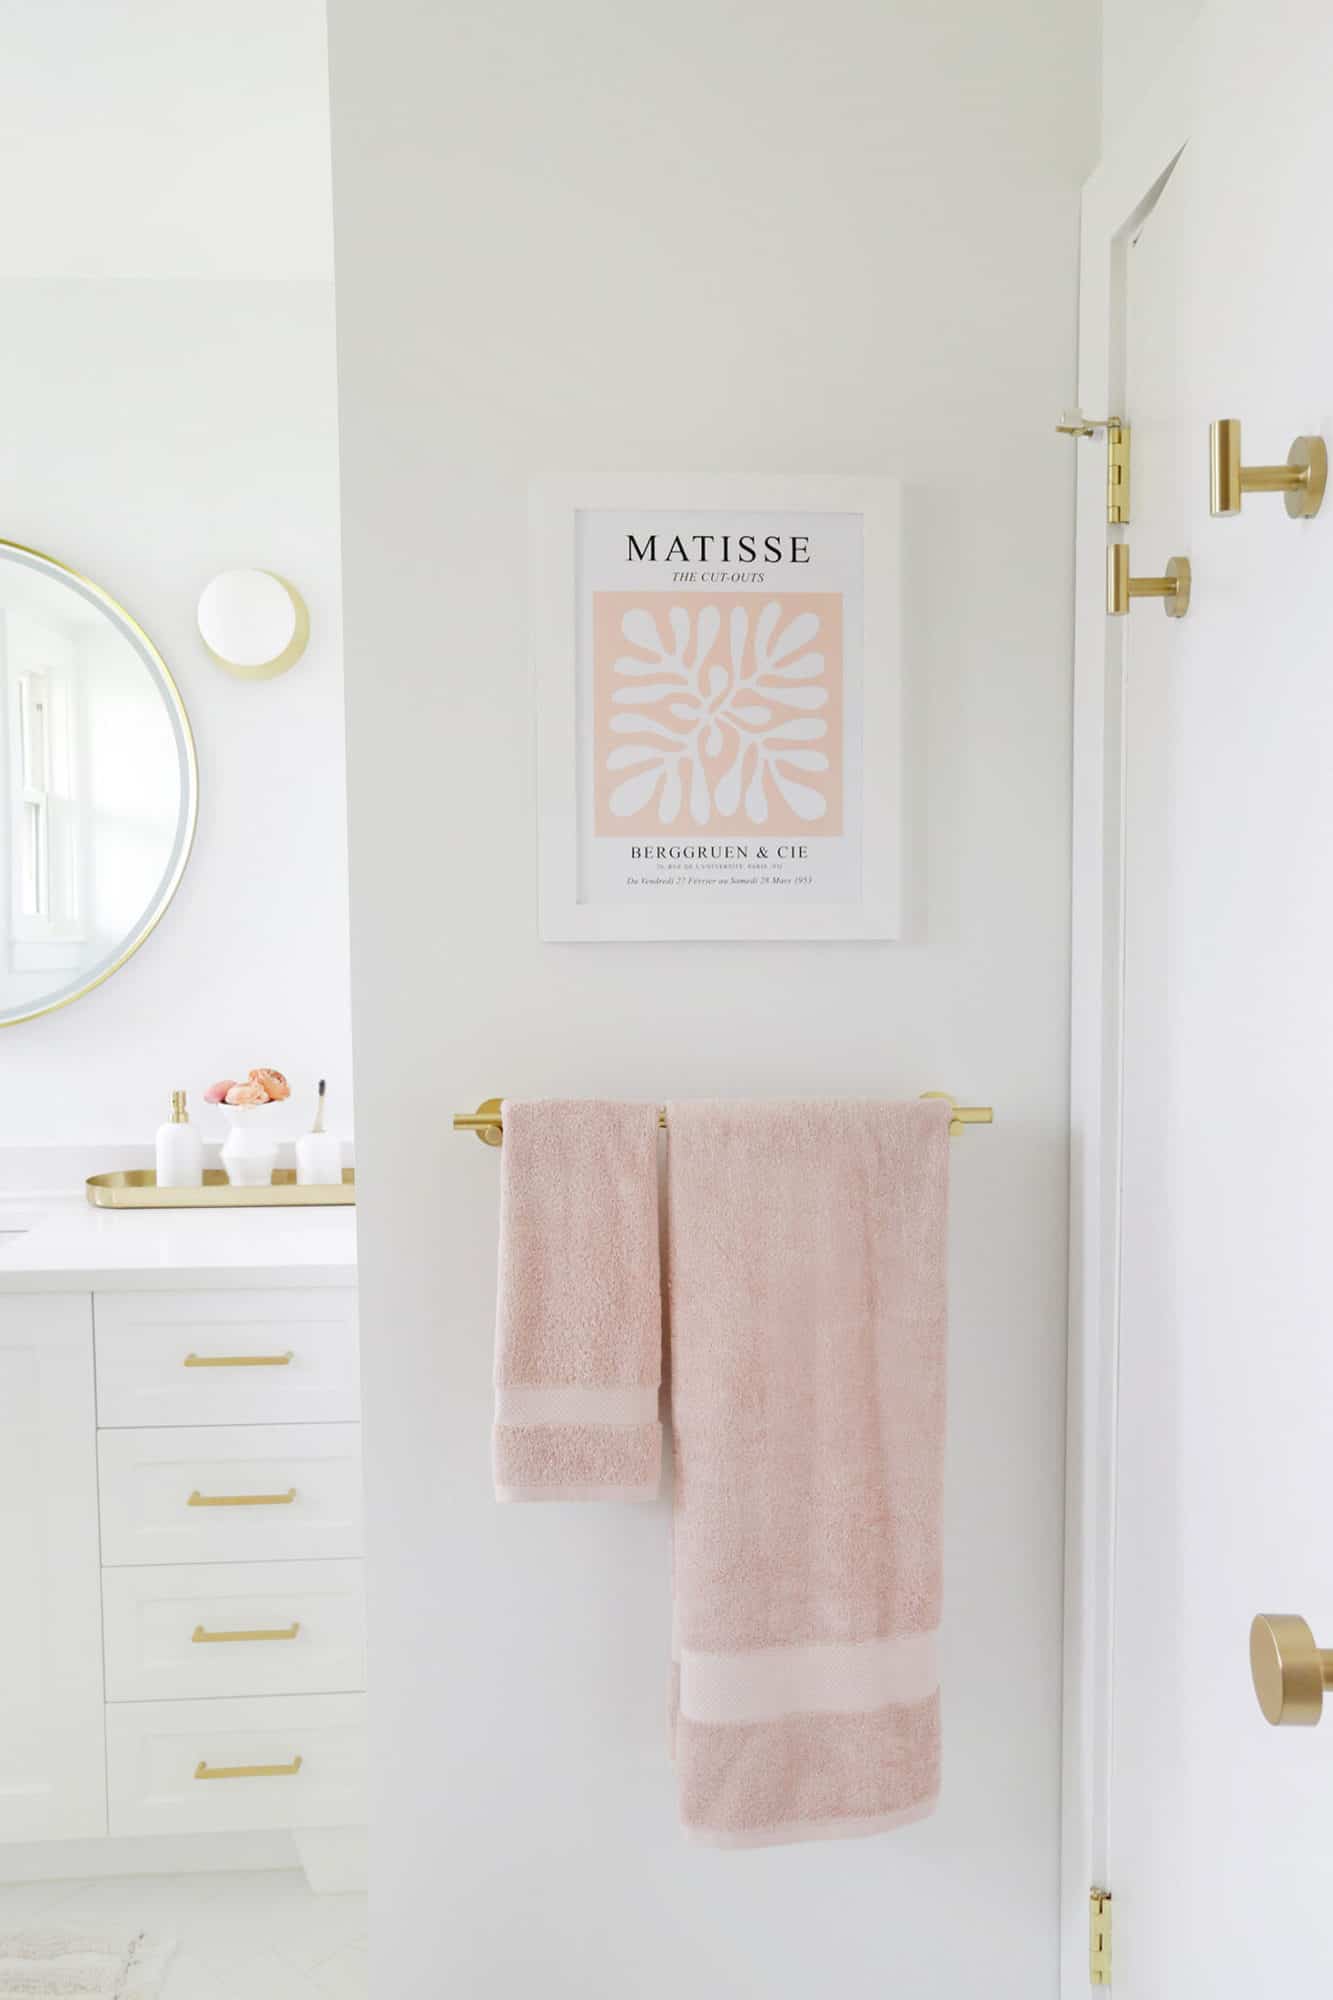 towel rack with pink towels and matisse print above it